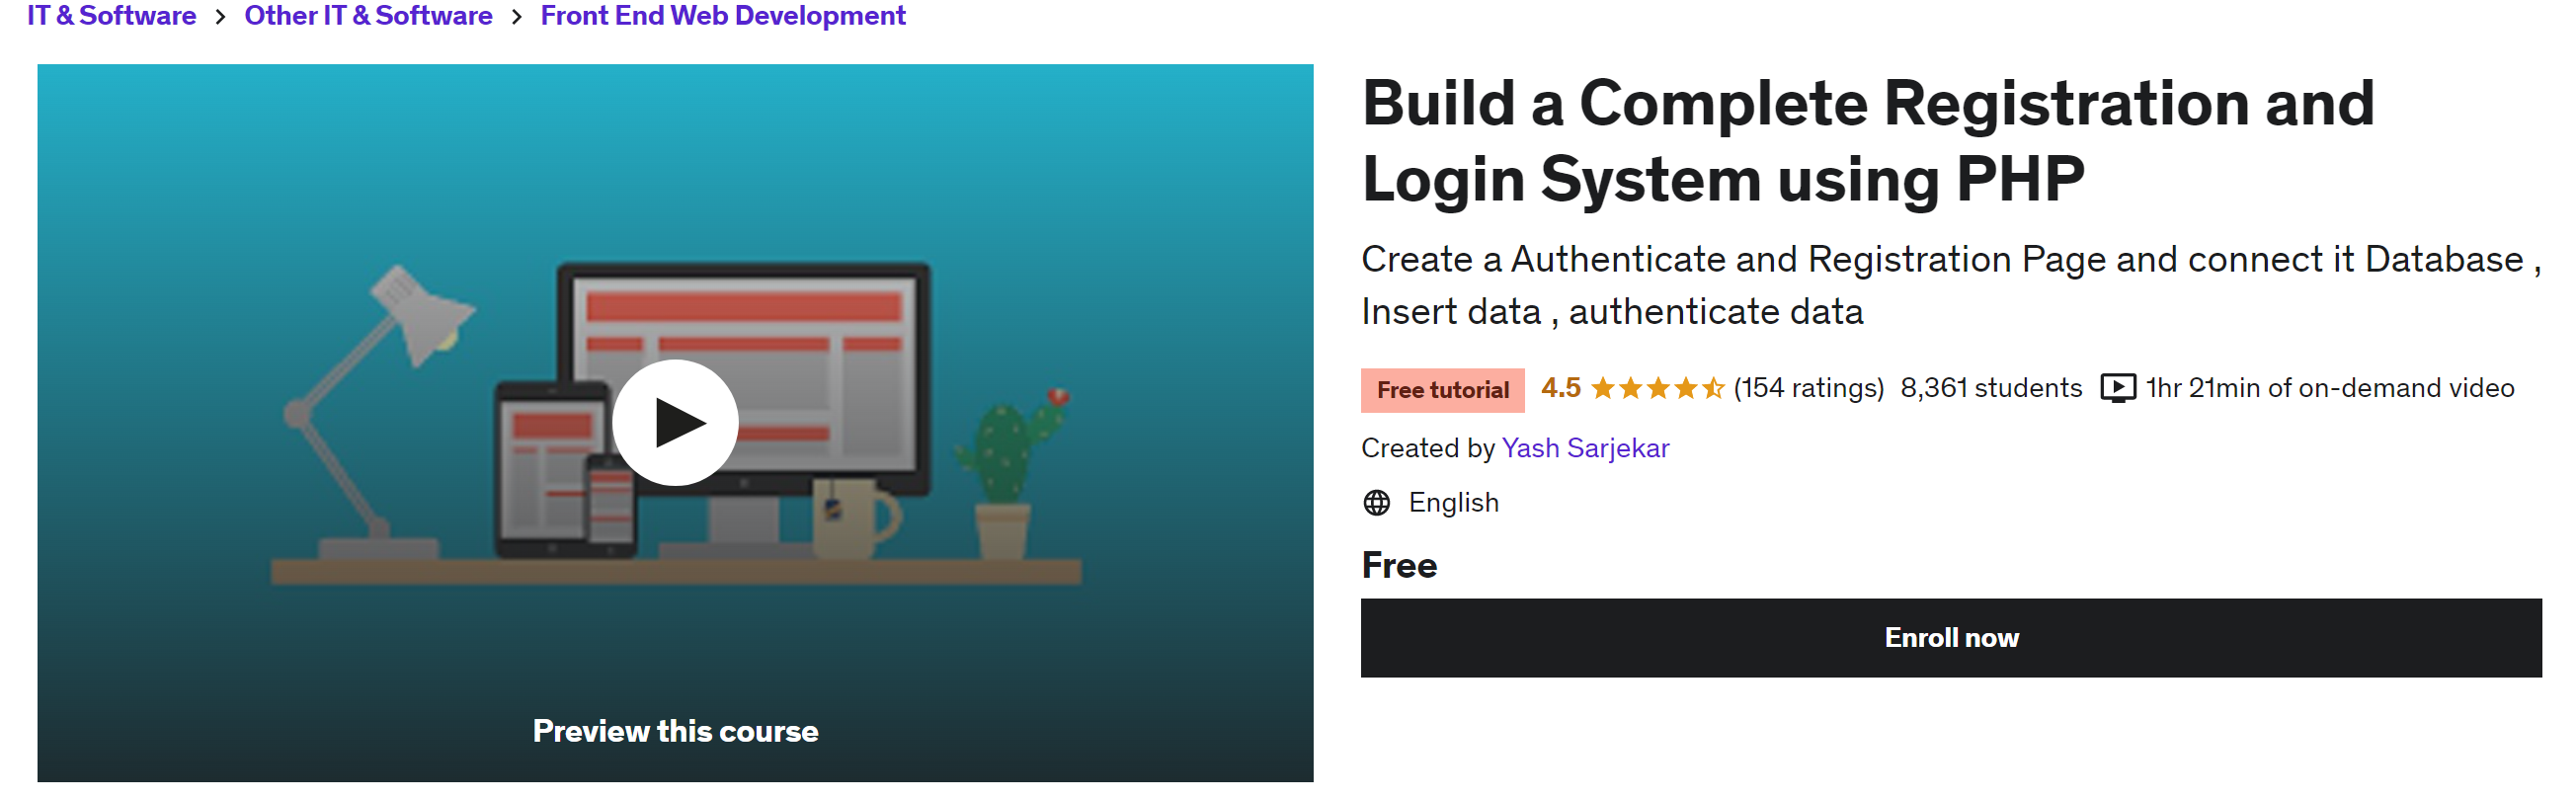 Build a complete registration and login system using PHP